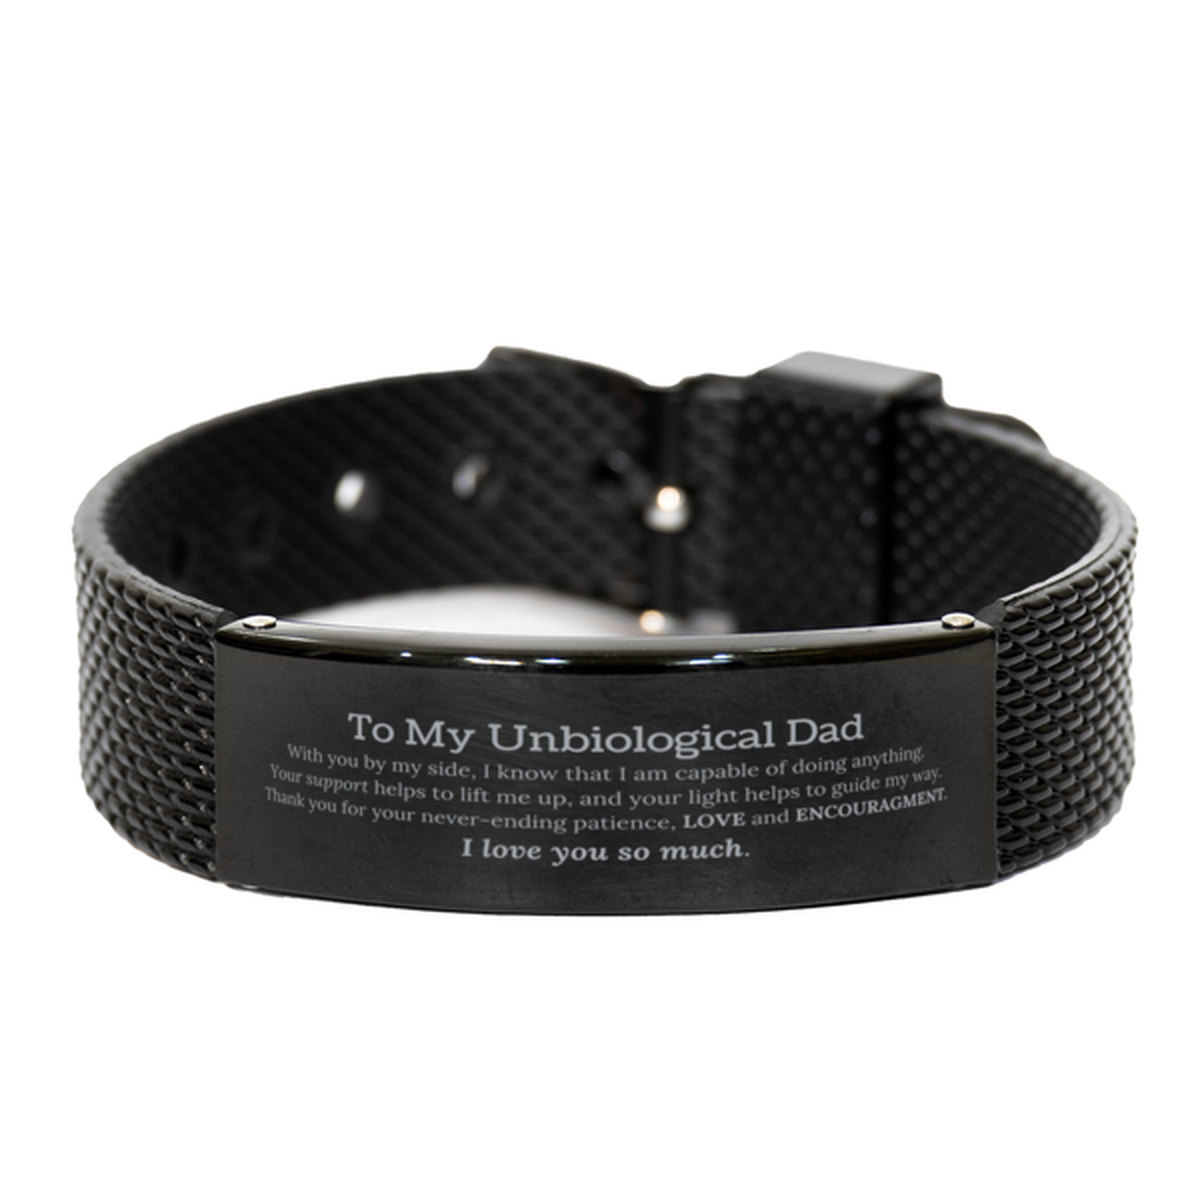 Appreciation Unbiological Dad Black Shark Mesh Bracelet Gifts, To My Unbiological Dad Birthday Christmas Wedding Keepsake Gifts for Unbiological Dad With you by my side, I know that I am capable of doing anything. I love you so much